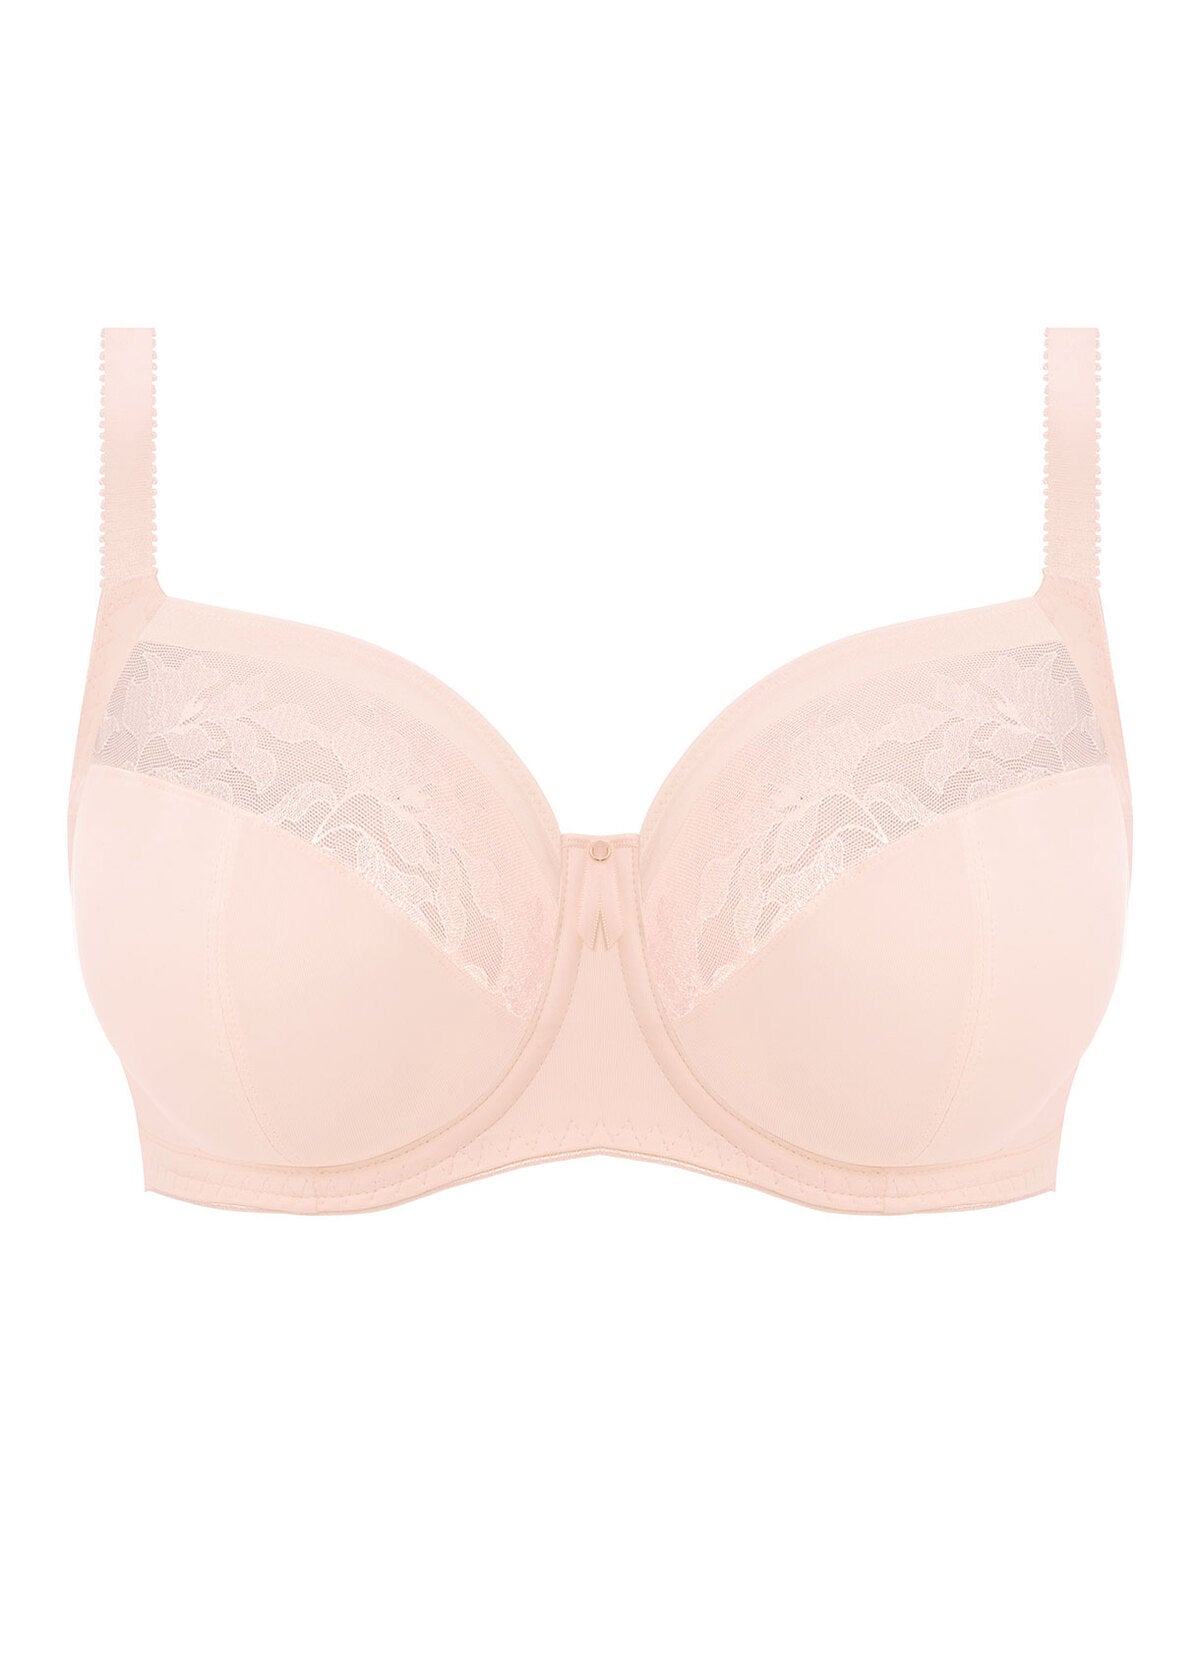 FANTASIE ILLUSION SIDE SUPPORT FULL CUP BRA